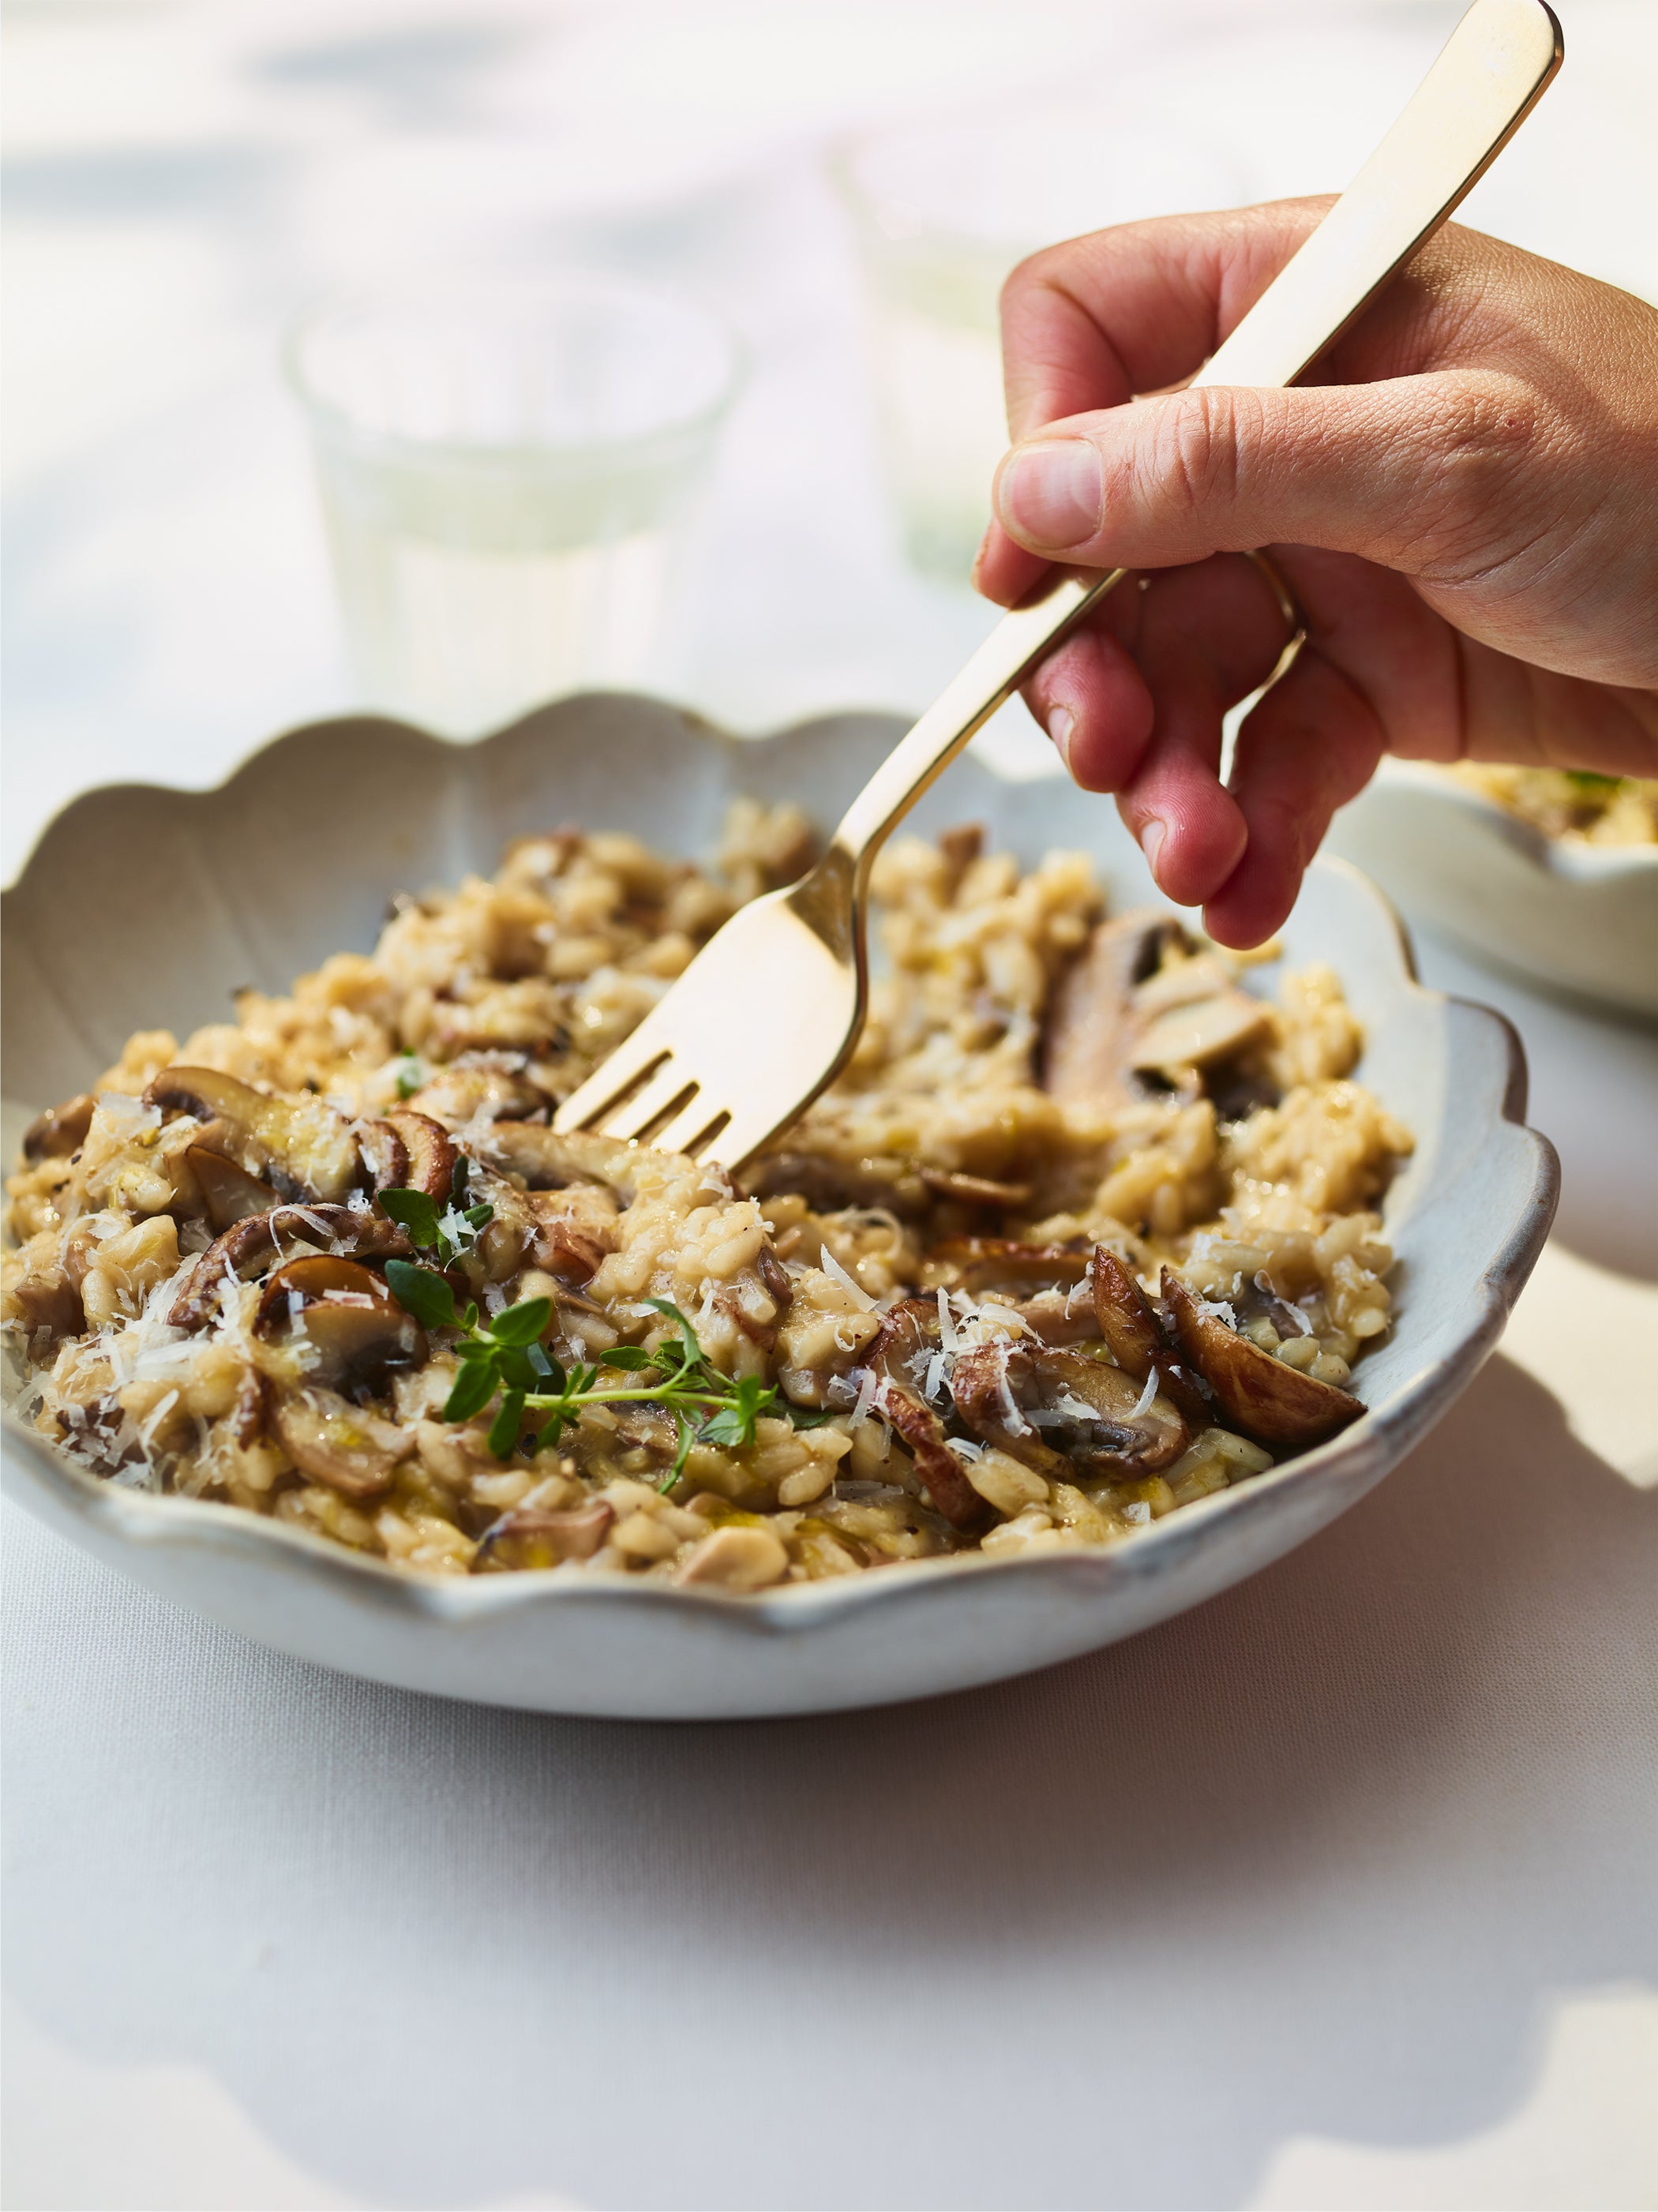 With mushrooms, garlic and herbs, this tasty risotto is an ideal supper on chilly nights